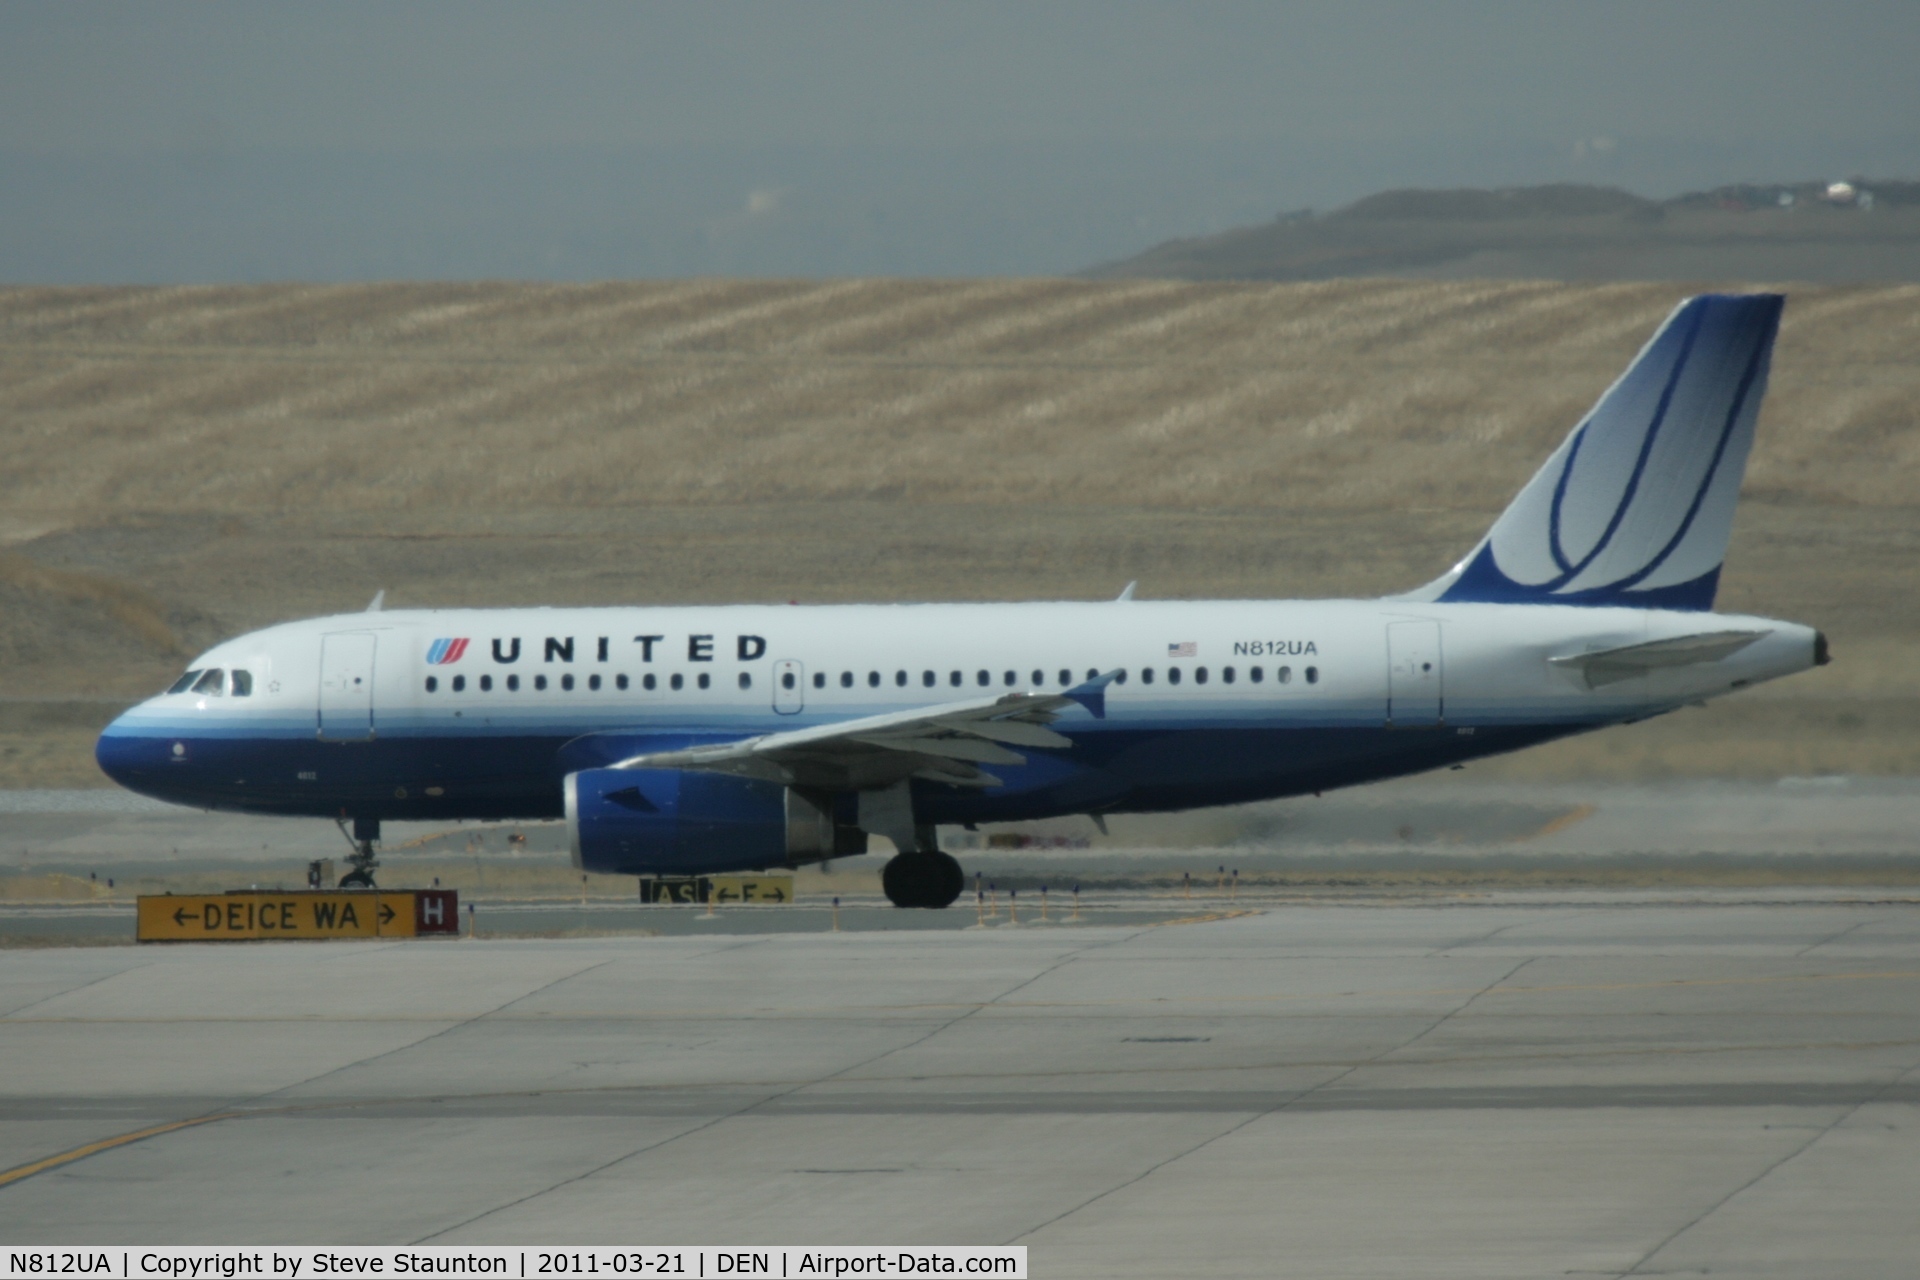 N812UA, 1998 Airbus A319-131 C/N 850, Taken at Denver International Airport, in March 2011 whilst on an Aeroprint Aviation tour